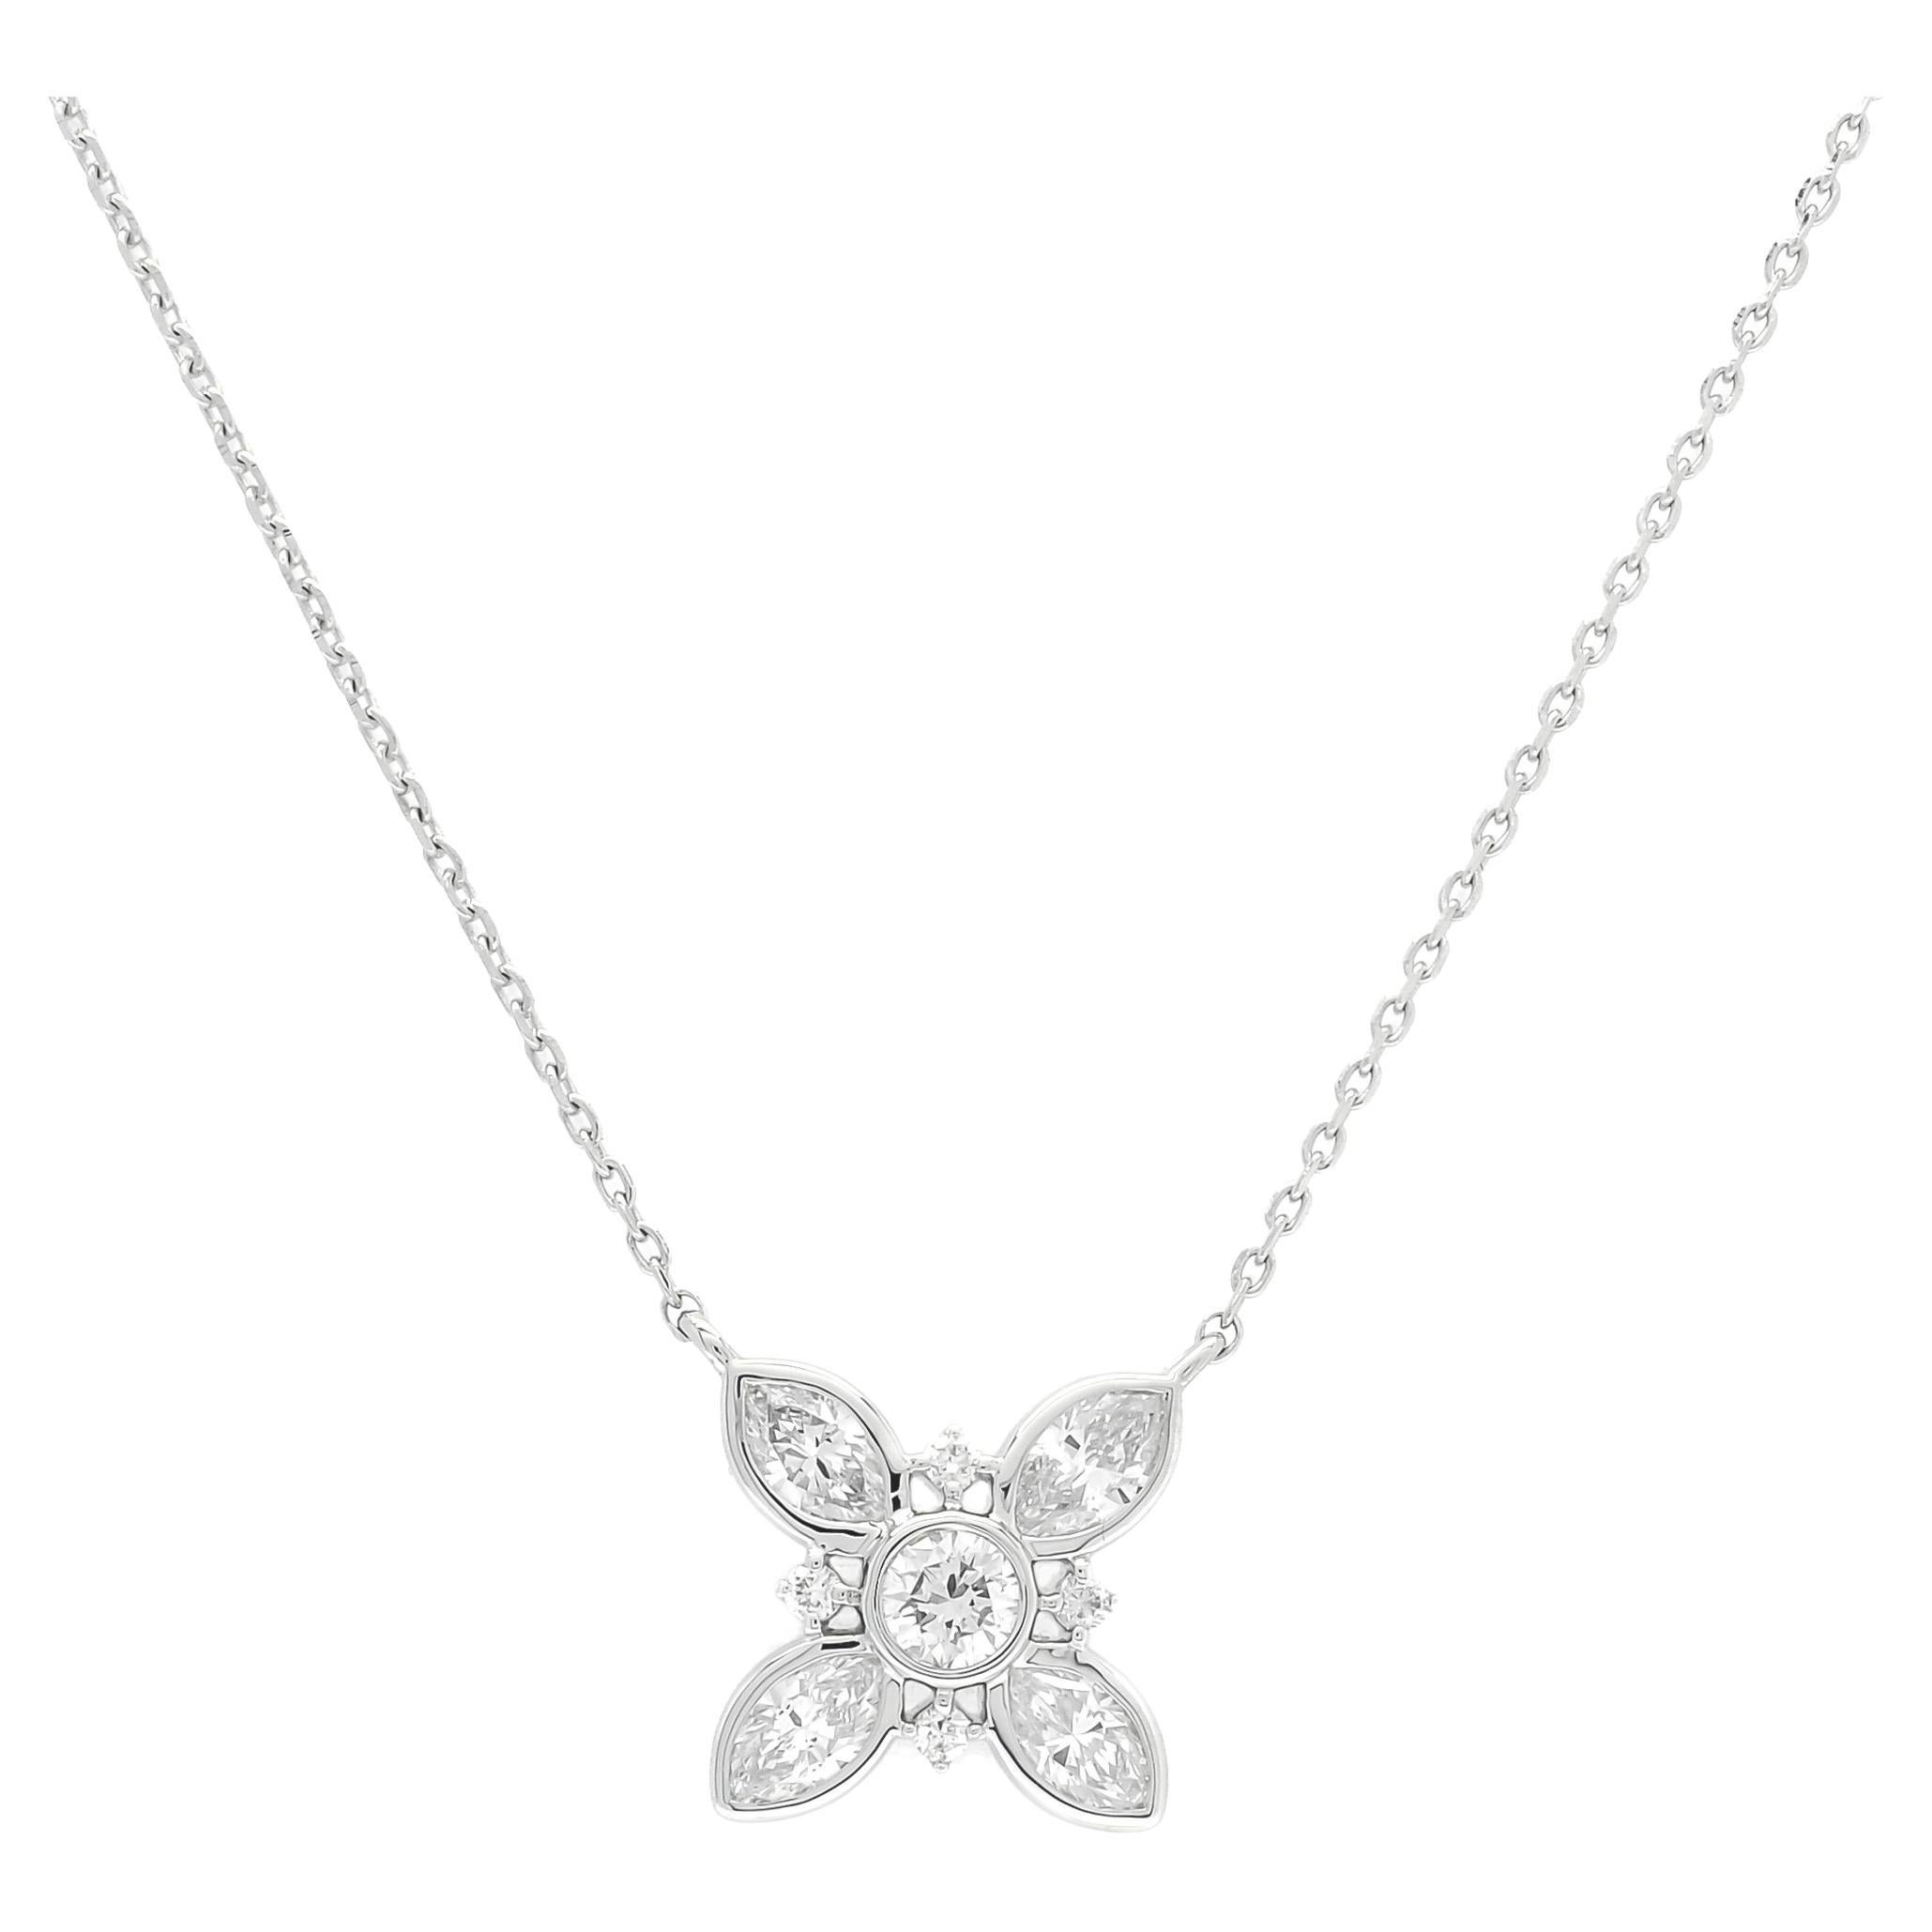 Natural Diamond 0.65 carats 18KT White Gold Flower Pendant Chain Necklace   For Sale